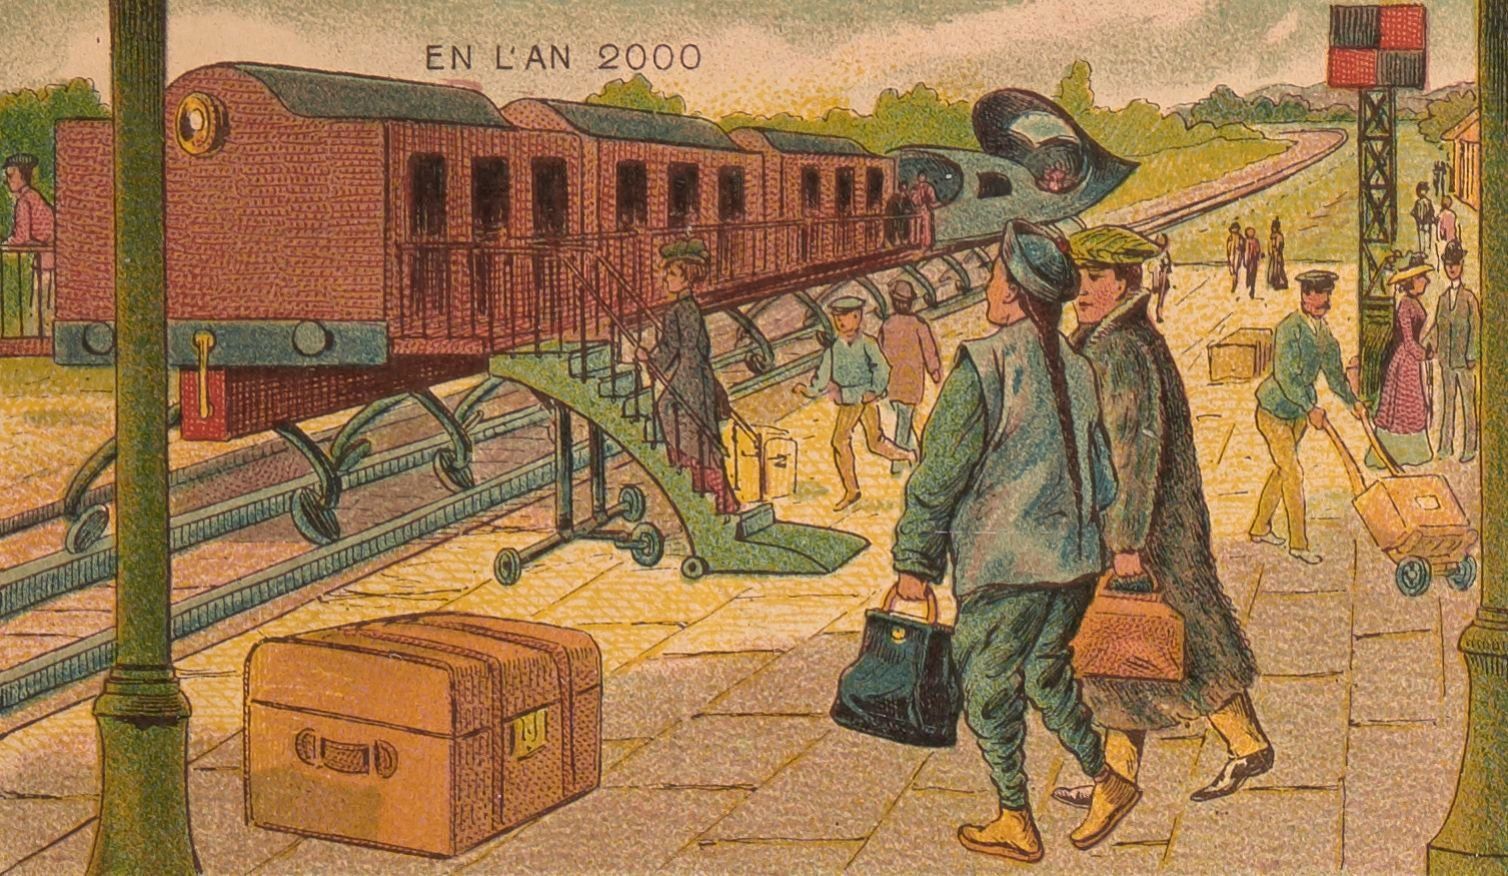 Hand drawn image of two people walking towards a train with elevated wheels and an aerodynamic engine. 